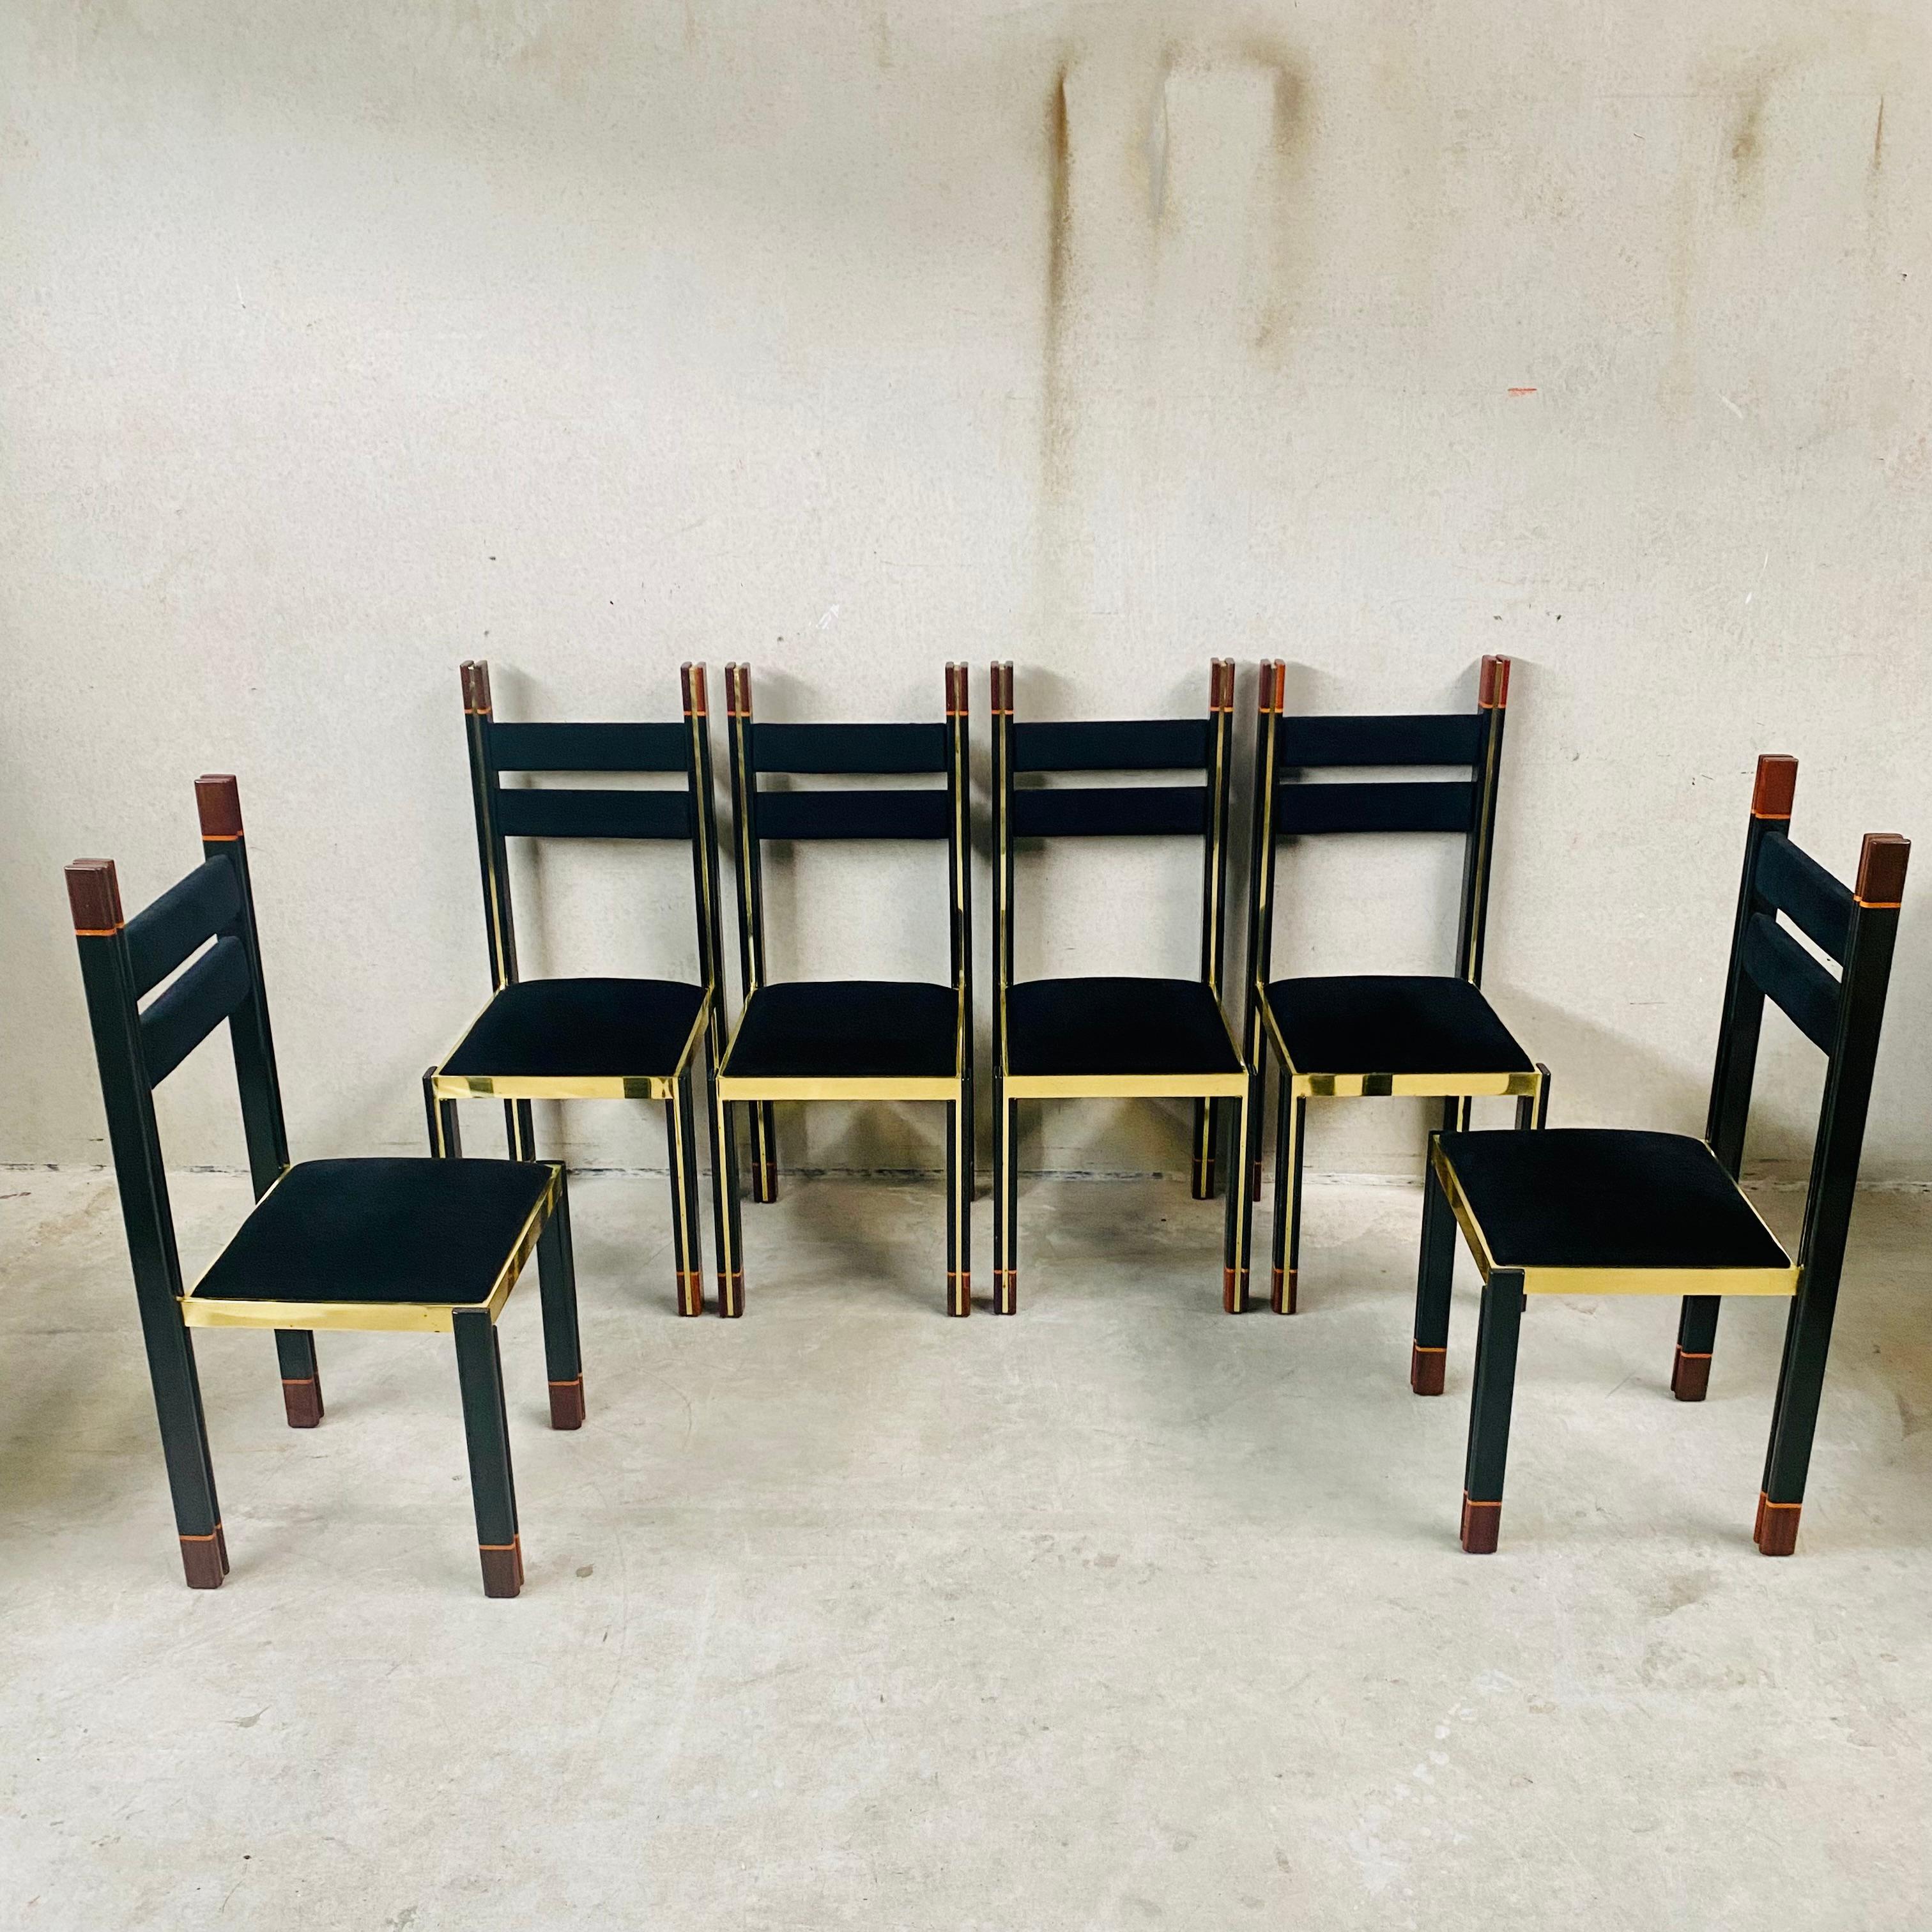 Italian Mid-Century Brass Walnut Dining Chairs by Paolo Barracchia for Roman Deco, 1978 For Sale